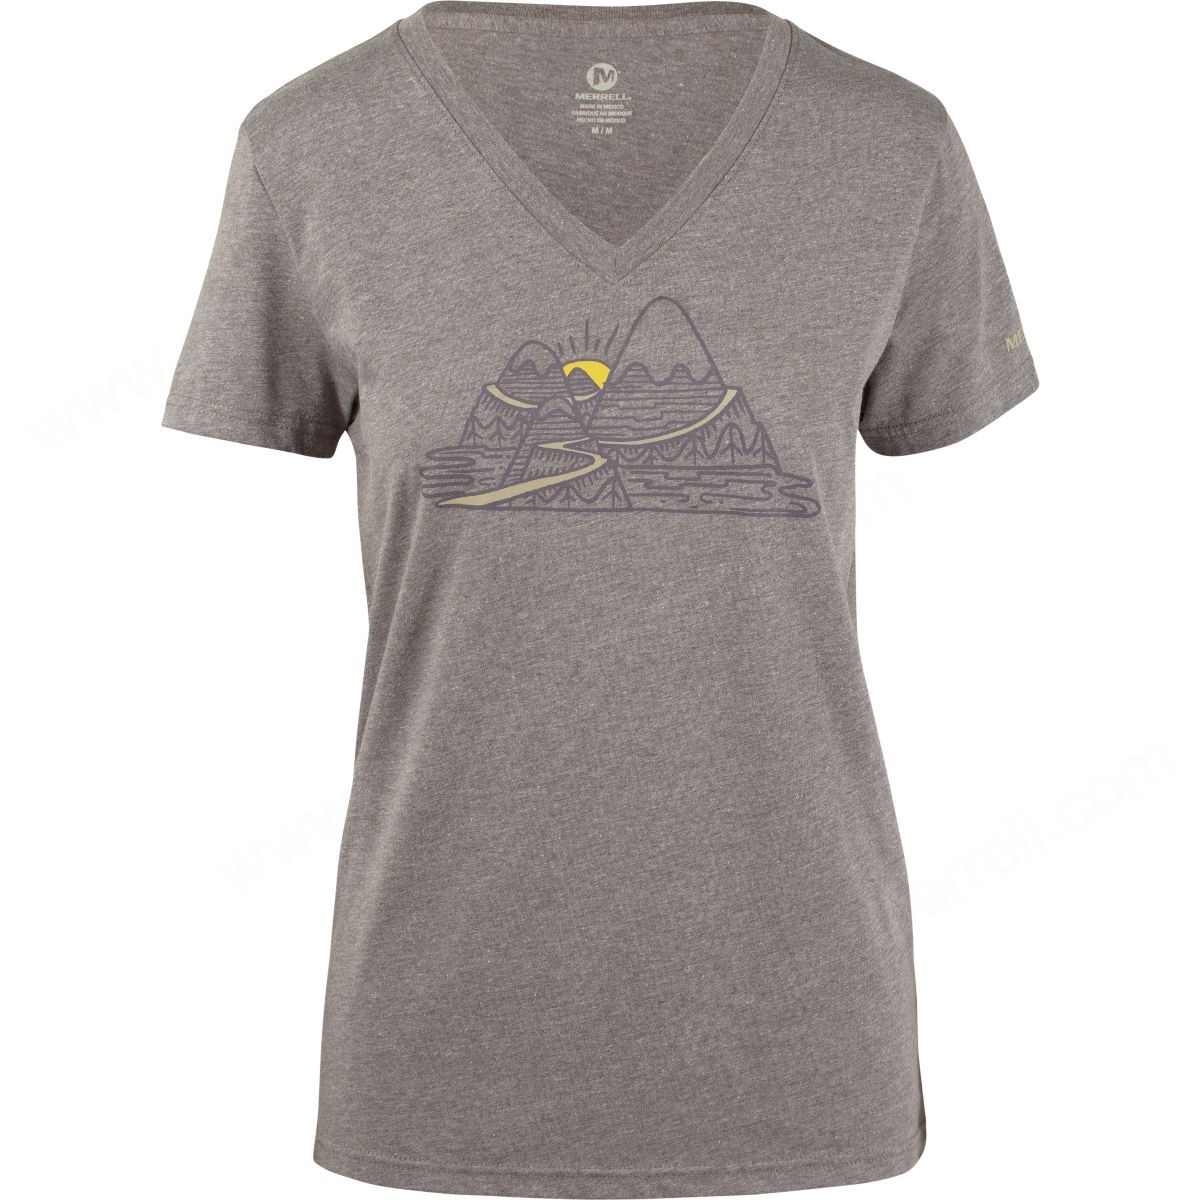 Merrell Lady's Rolling Hills Graphic Tshirts Heather Grey - Merrell Lady's Rolling Hills Graphic Tshirts Heather Grey